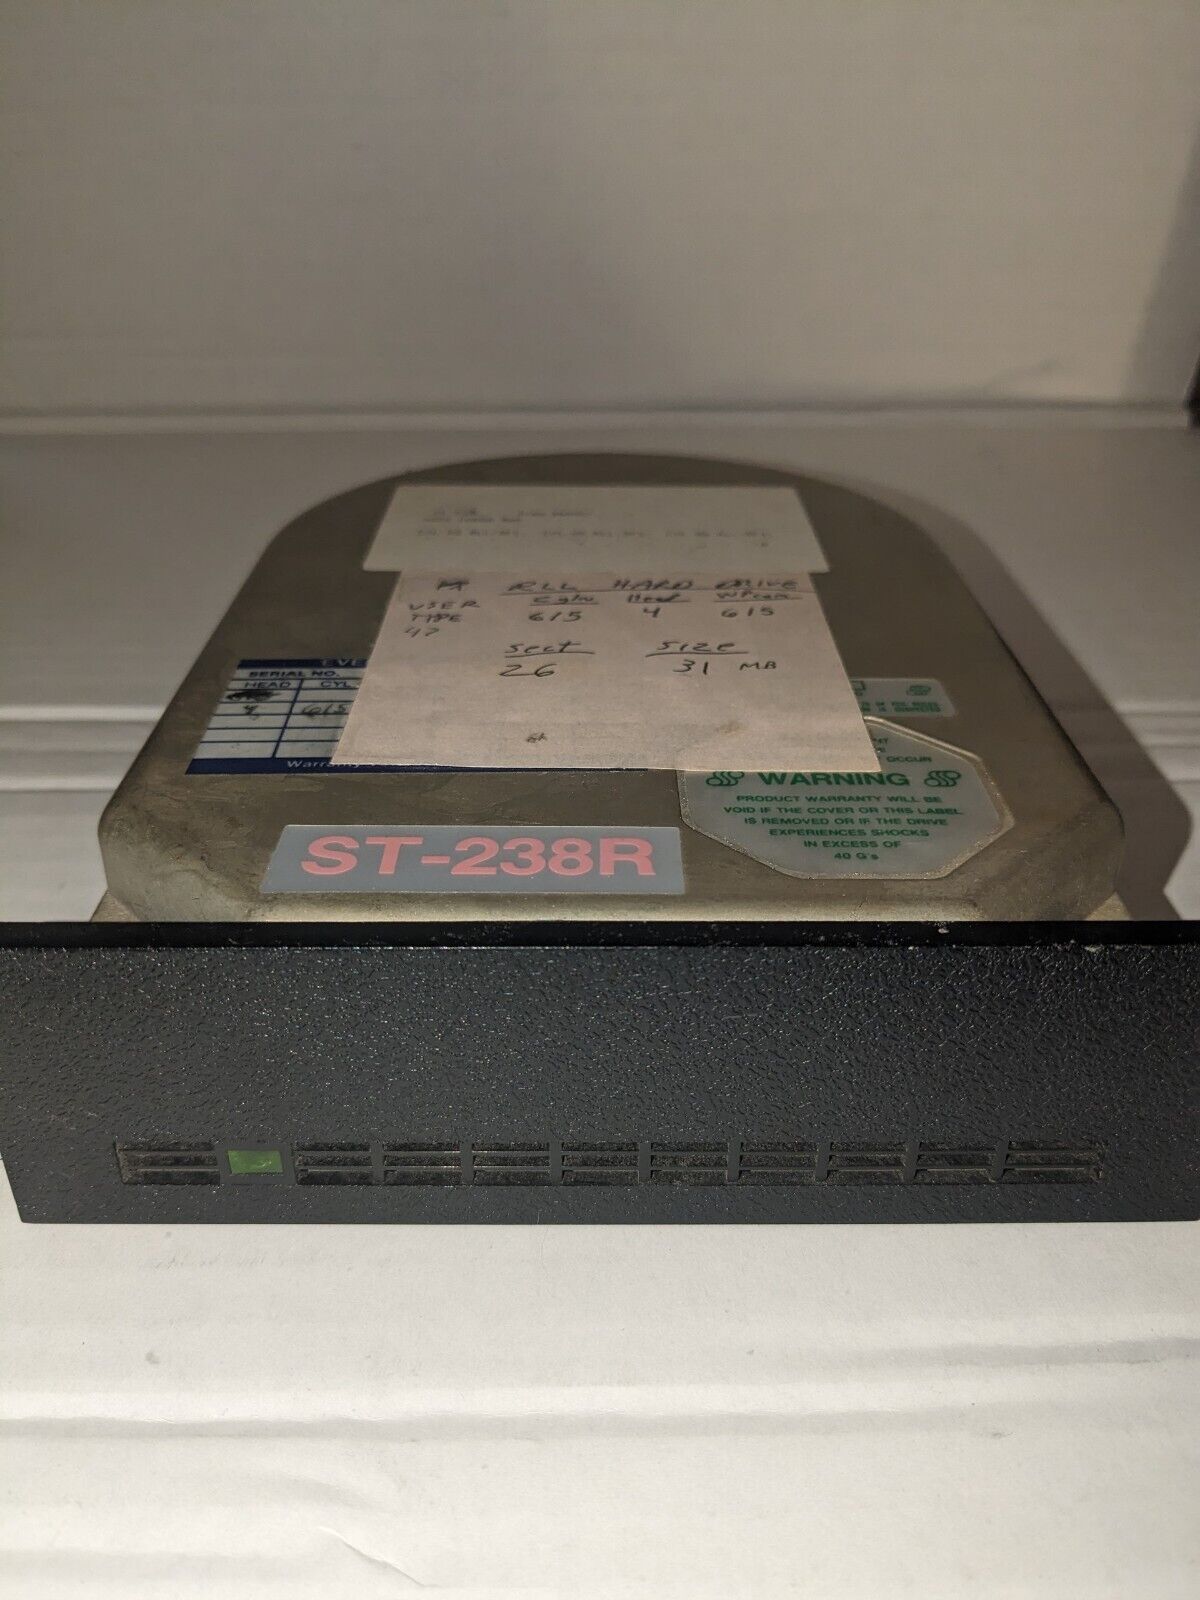 Seagate ST-238R  5.25” RLL Half Height  Hard Disk Drive. 30MB Vintage 